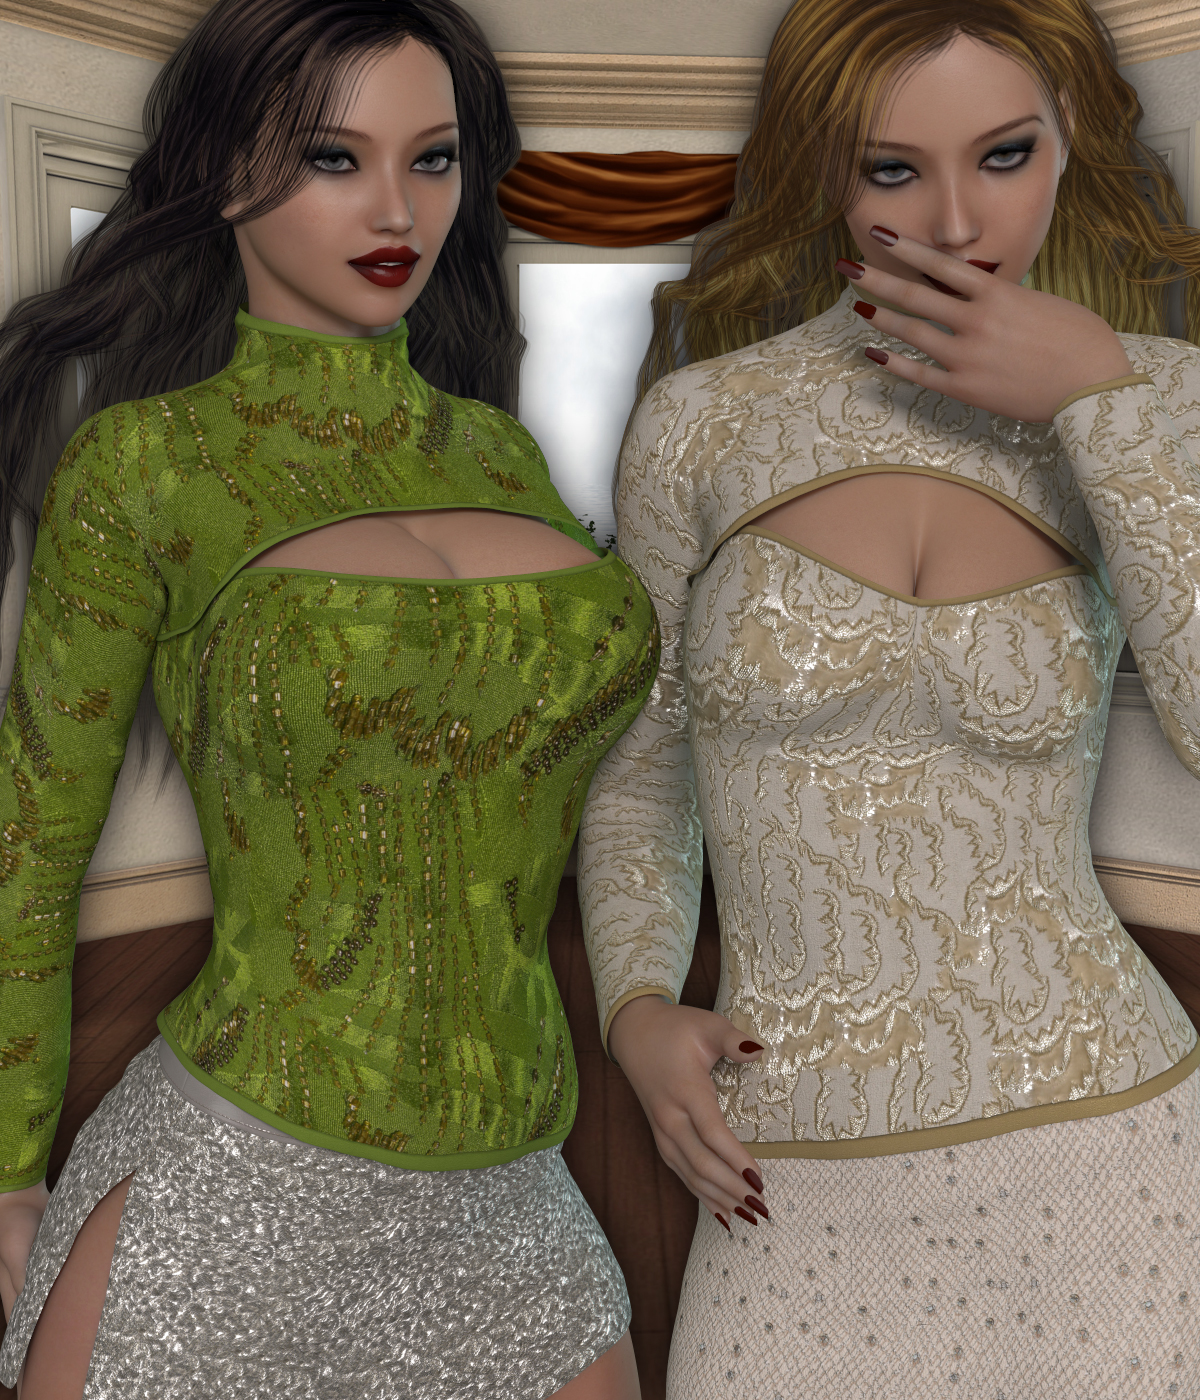 InStyle - Unforgettable Genesis 2 Females by: valkyrie, 3D Models by Daz 3D